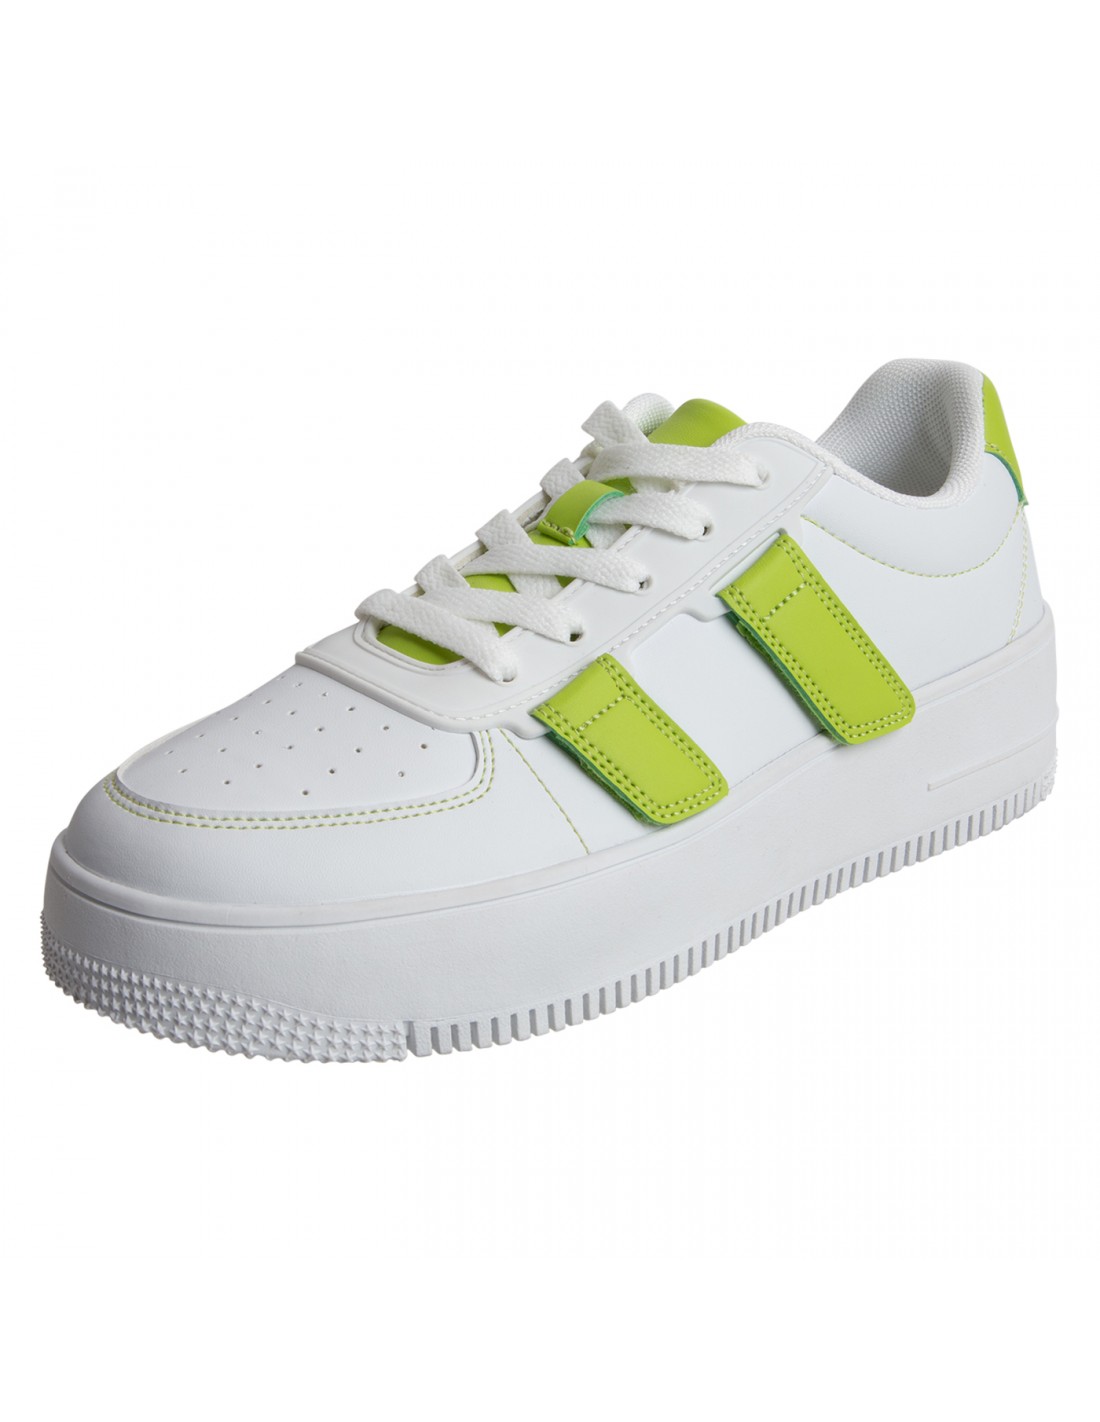 Discover 209+ velcro sneakers womens adidas best